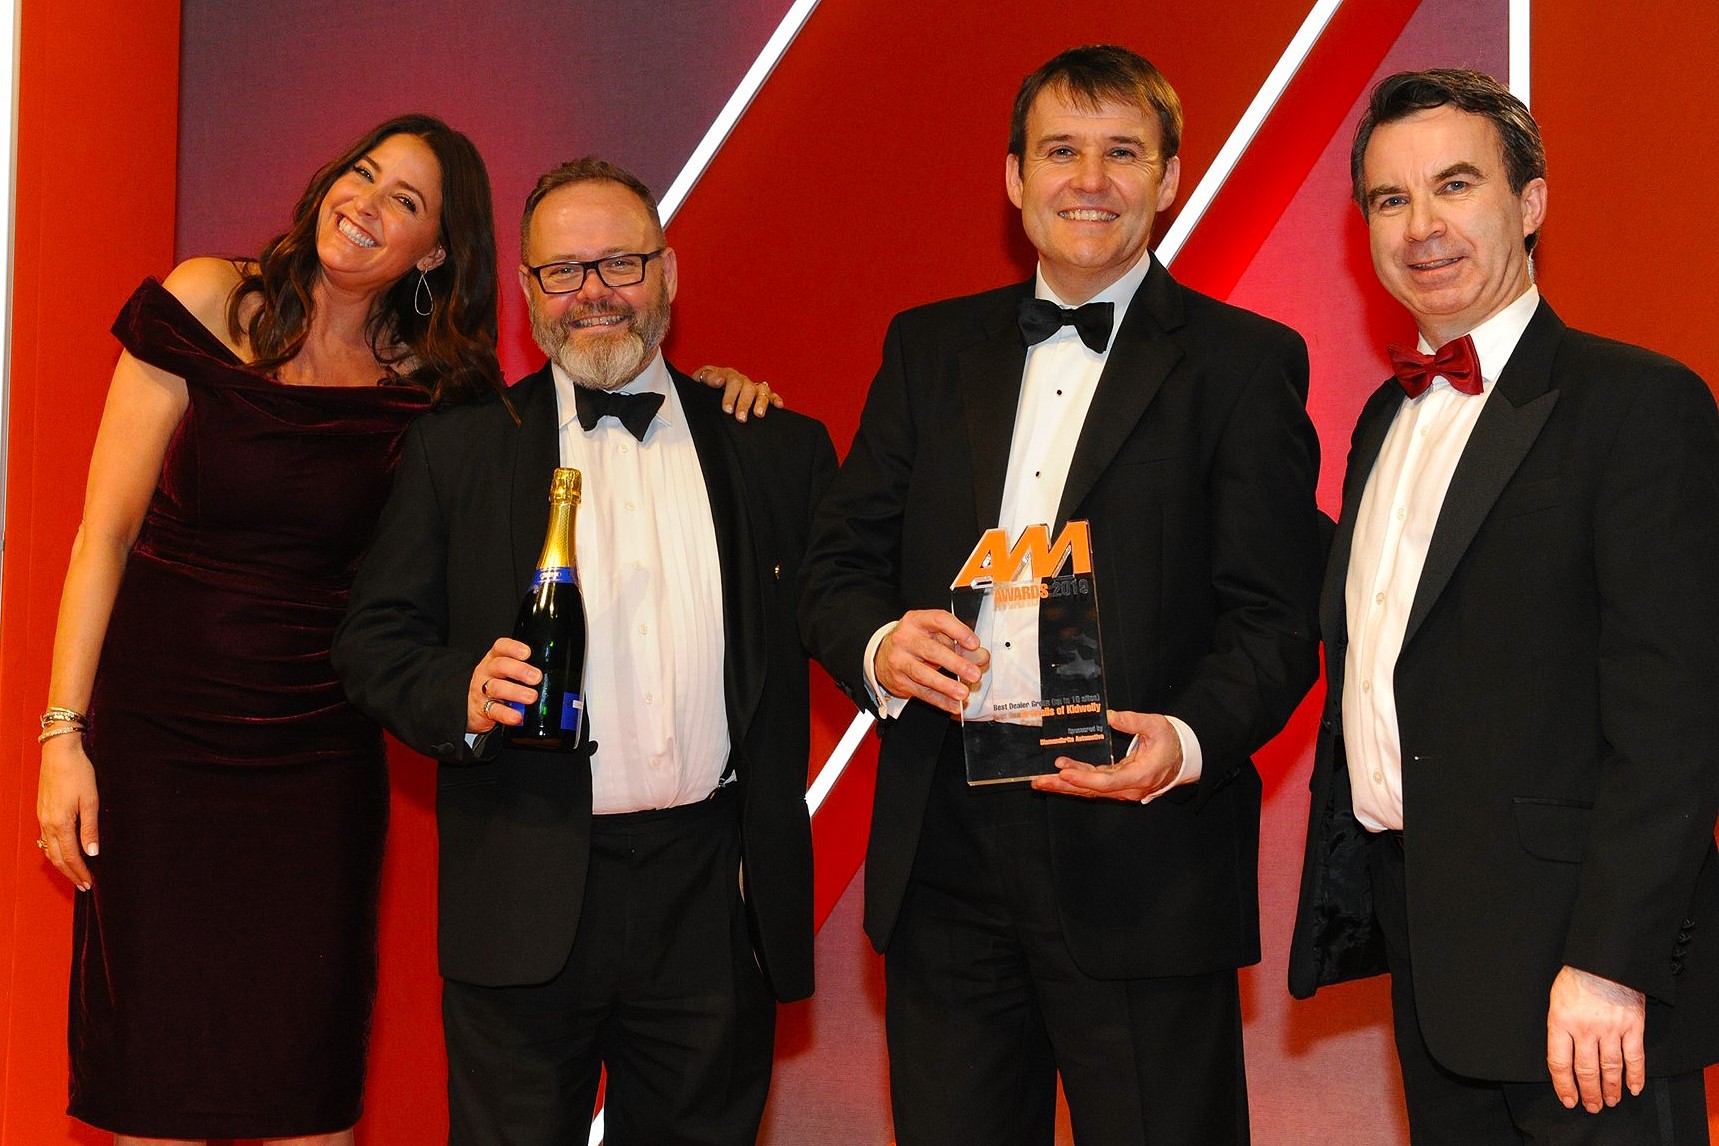 Jonathan Gravell, managing director, Gravells of Kidwelly, second from right, and Ian Gravell, general manager, second from left, accept the award from Lance Boseley, marketing director,  Jewelultra (manufacturers of Diamondbrite), right, and host Lisa Snowdon, left